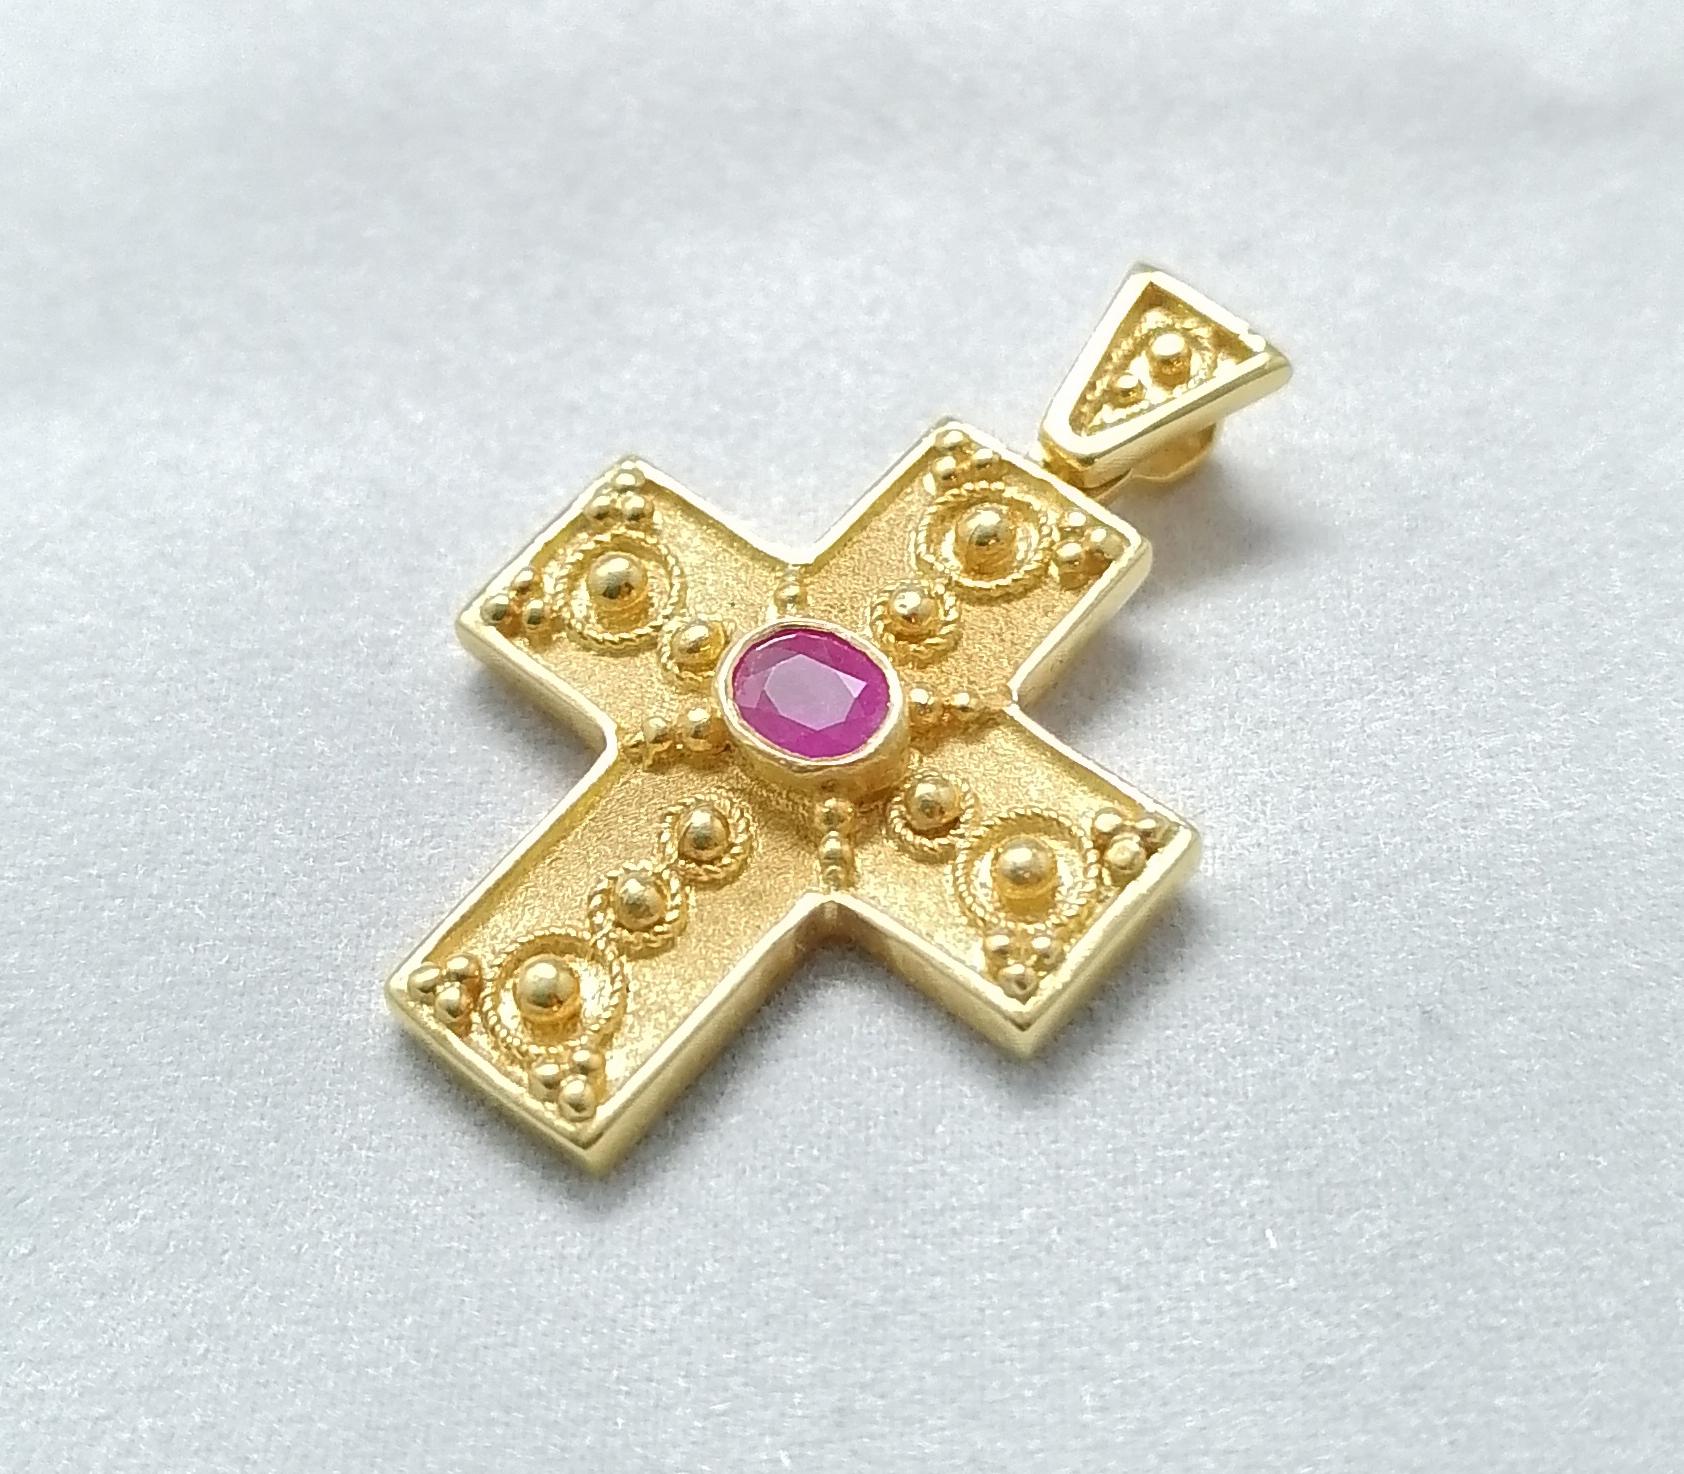 This S.Georgios solid 18 Karat Yellow Gold geometric Cross pendant is beautifully handmade and microscopically decorated Byzantine-style bead granulation work. This gorgeous cross features an oval-cut natural Ruby total weight 0.37 Carat and is